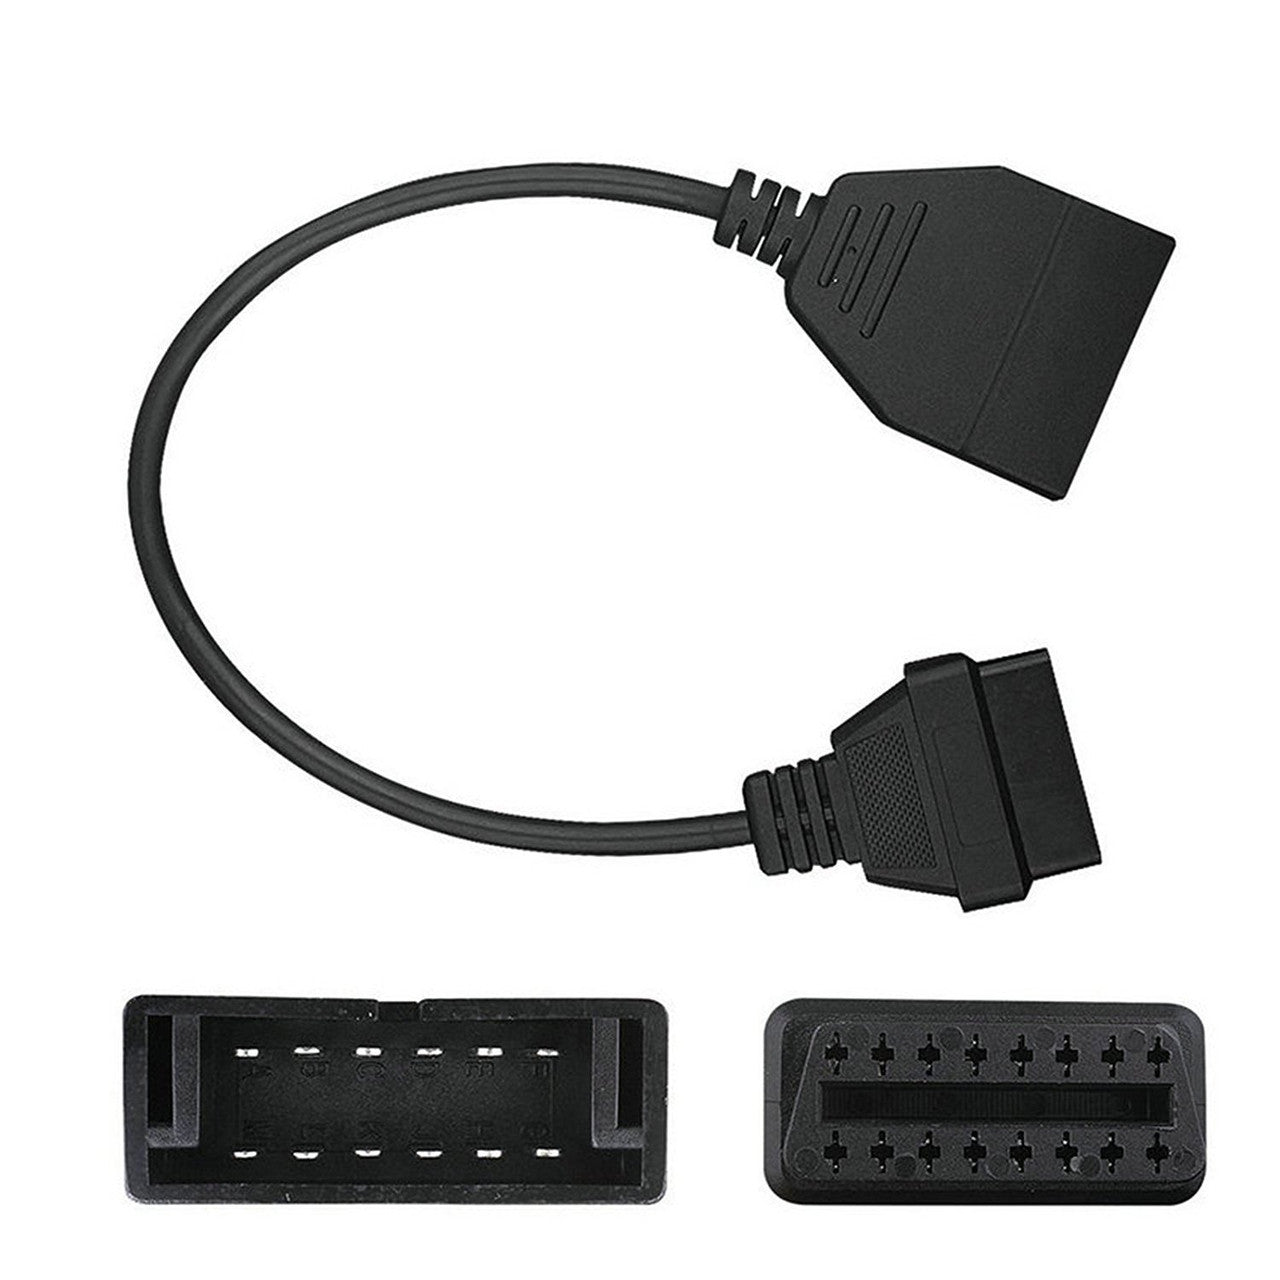 GM 12 Pin To OBD1 OBD2 OBD-II 16 Pin Adapter Connector Car Motor Diagnostic Tool Diagnostics Adapter Cable Connector for GM Vehicle